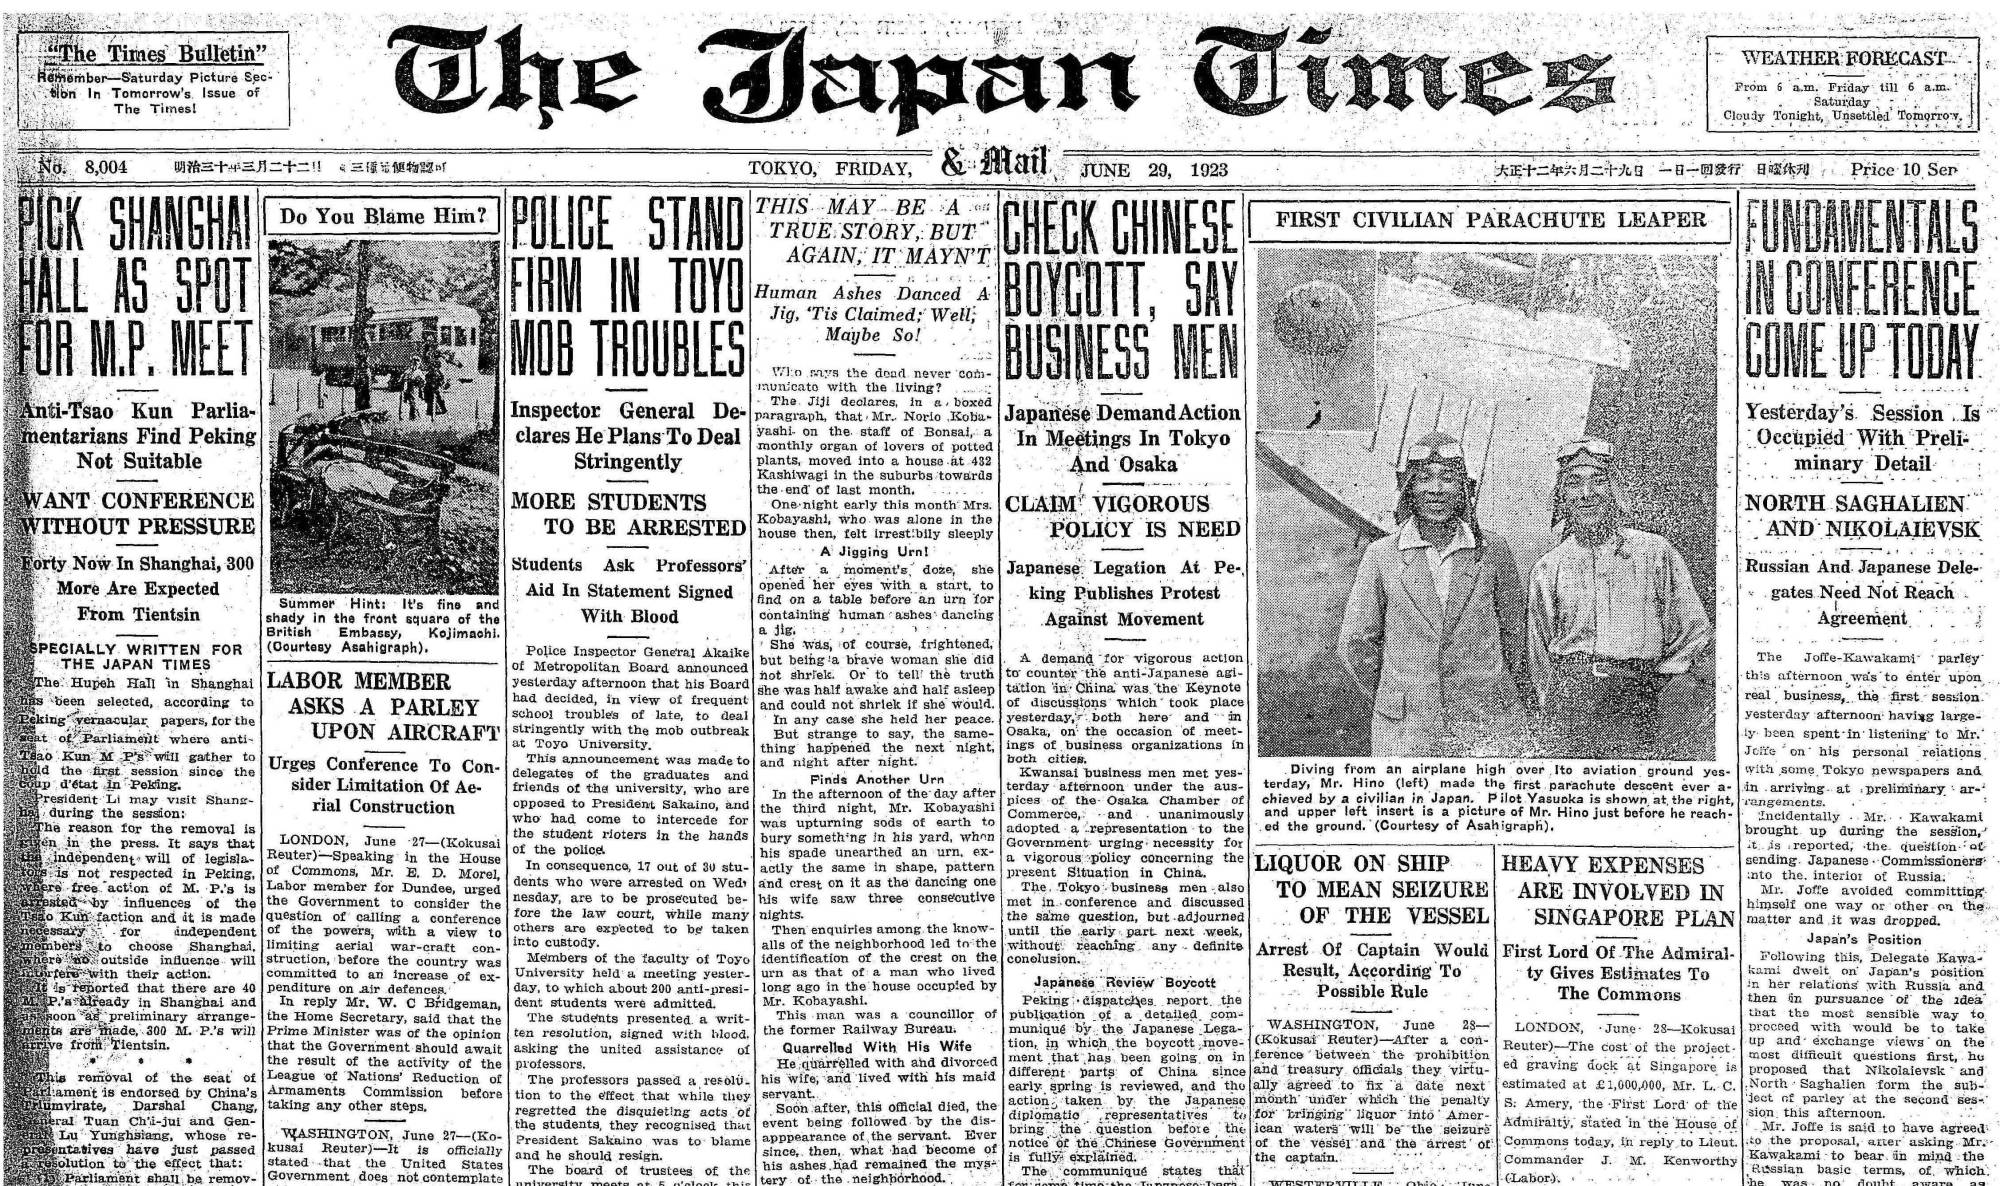 The front page of The Japan Times from June 29, 1923, carried a portrait of the first Japanese civilian to jump out of a plane with a parachute as well as news of some zombie ashes.  | THE JAPAN TIMES